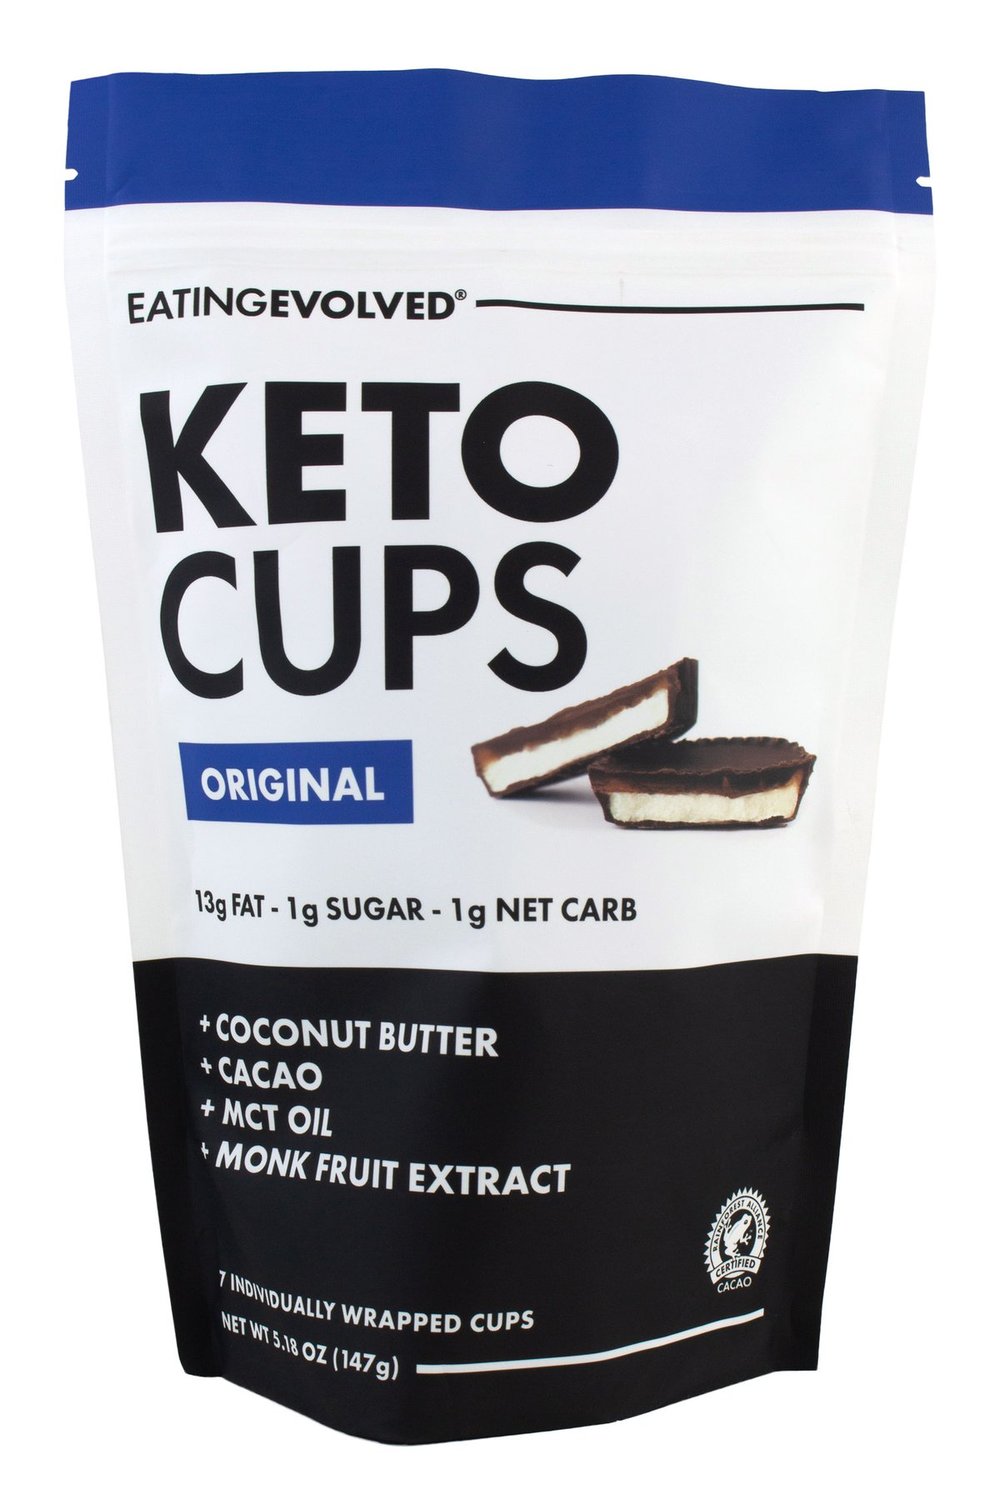 Eating Evolved Chocolate Keto Cups   Use Code: "DOM" for a free gift